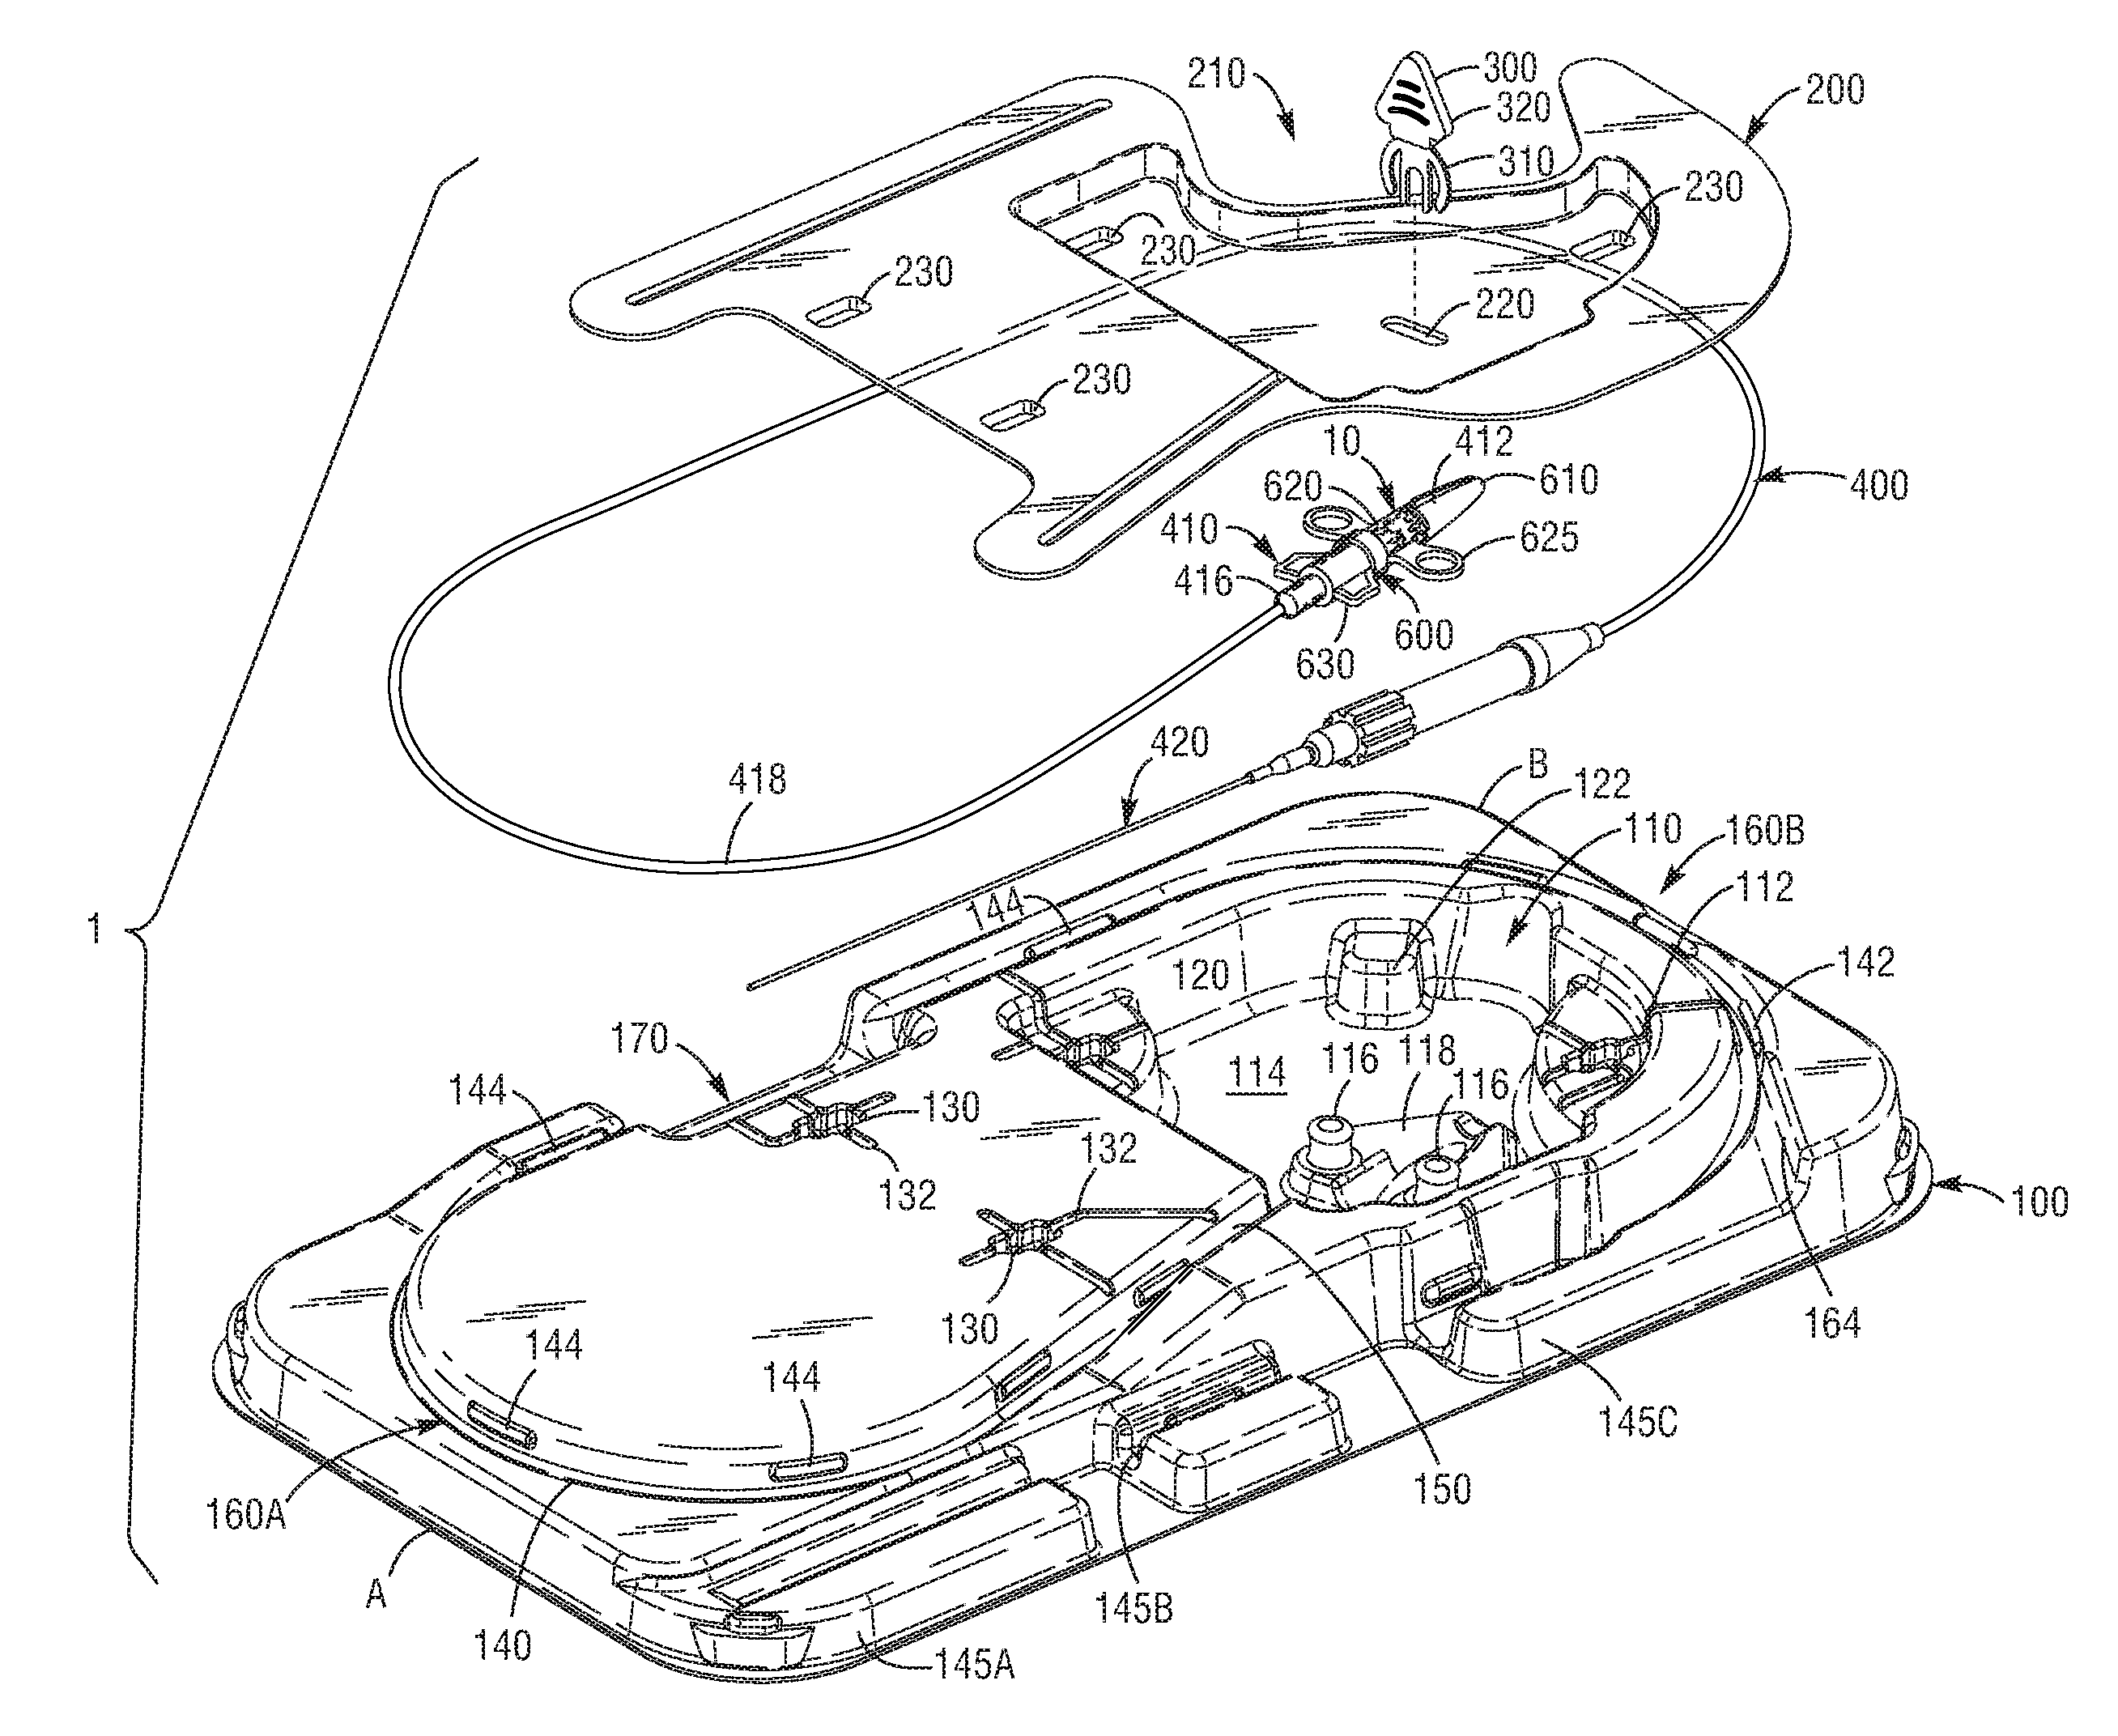 Method and system for packaging and preparing a prosthetic heart valve and associated delivery system